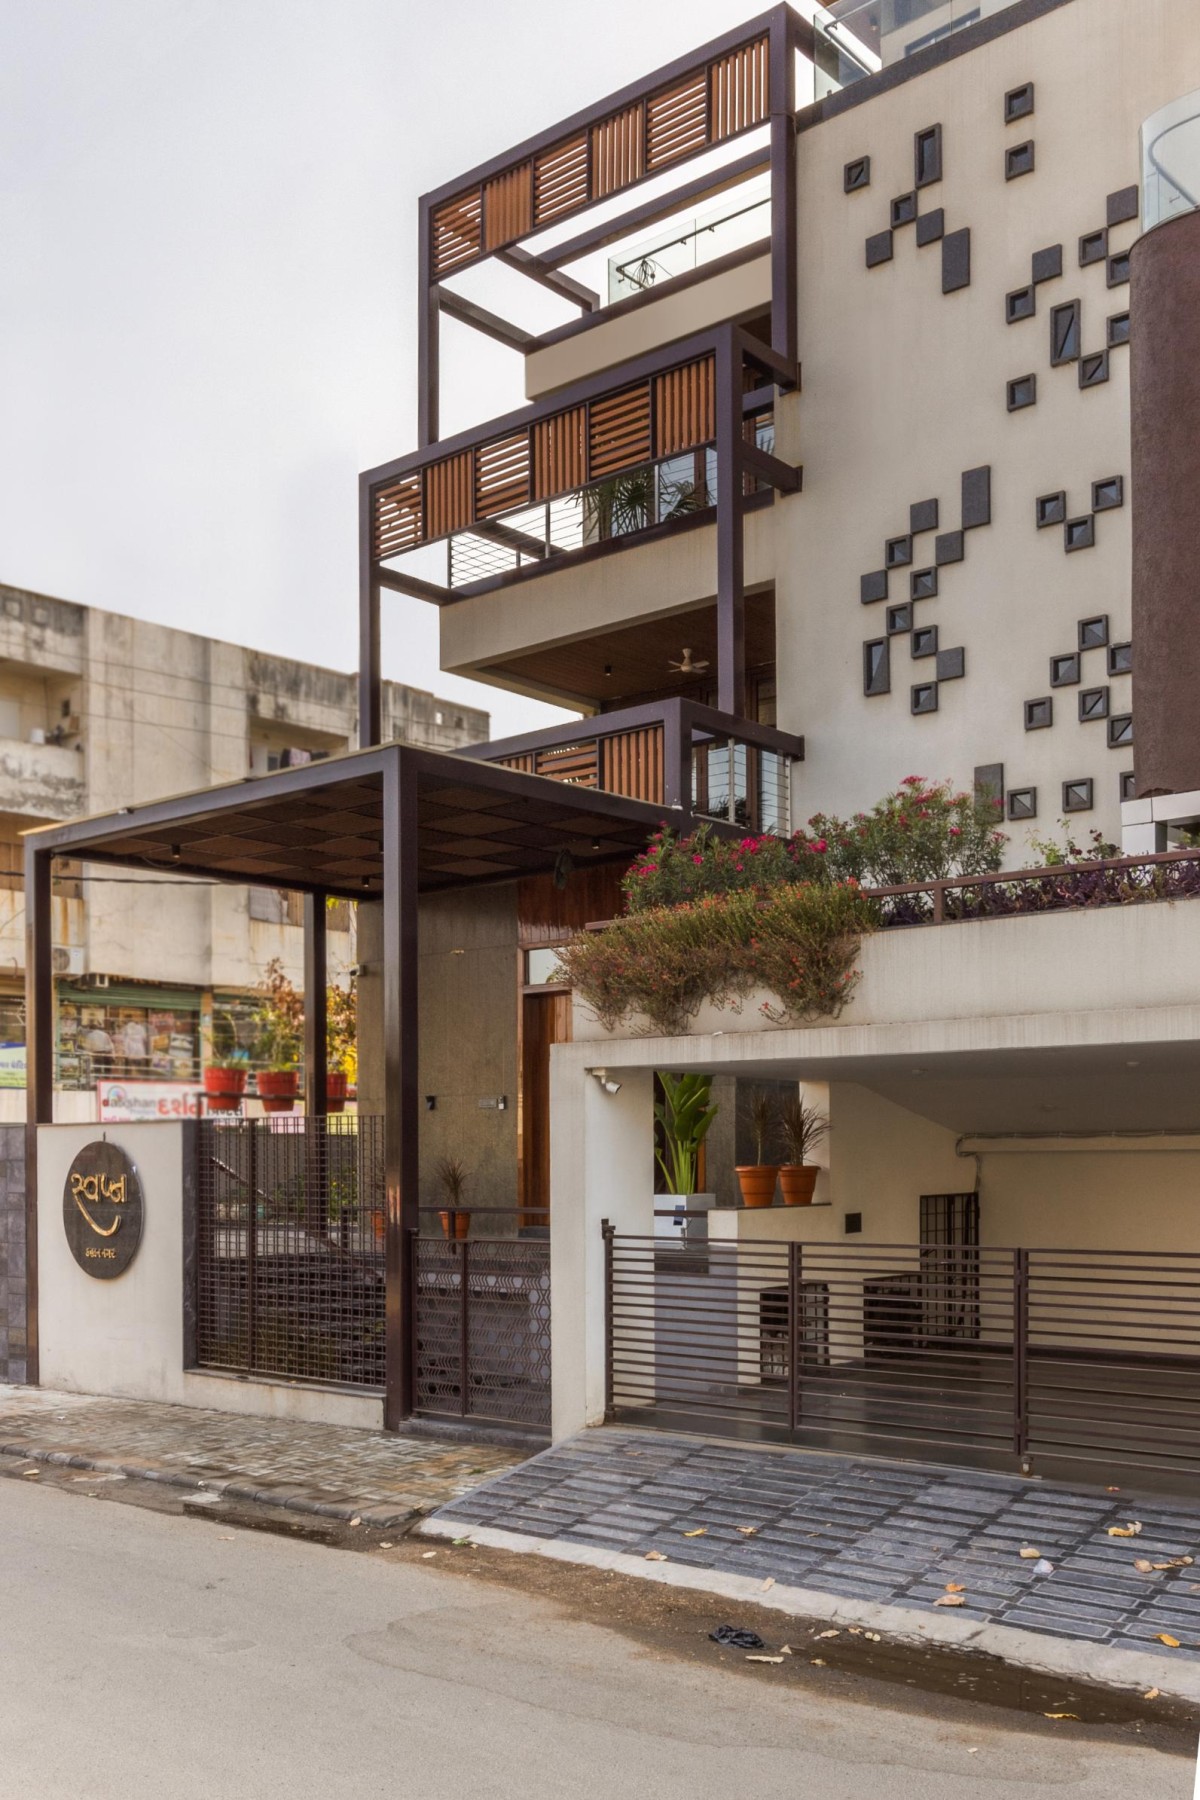 Entrance and Parking of Swapna Residence - A Harmonious Fusion of Design and Function by Architects at Work